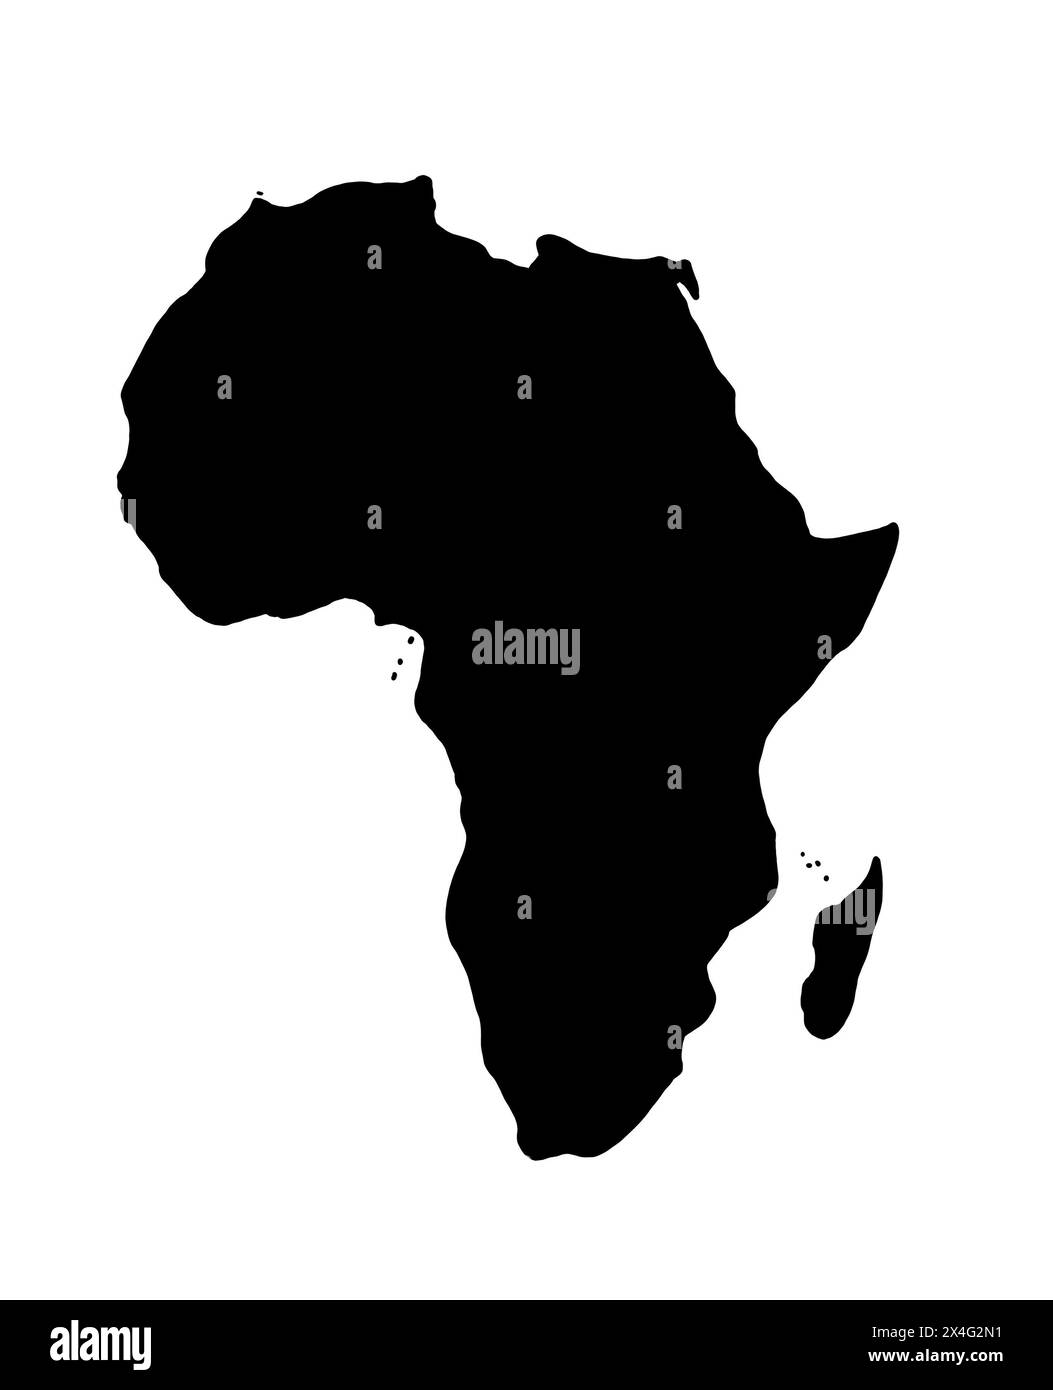 Black silhouette from the continent of Africa. World map illustration on the white background. Stock Photo